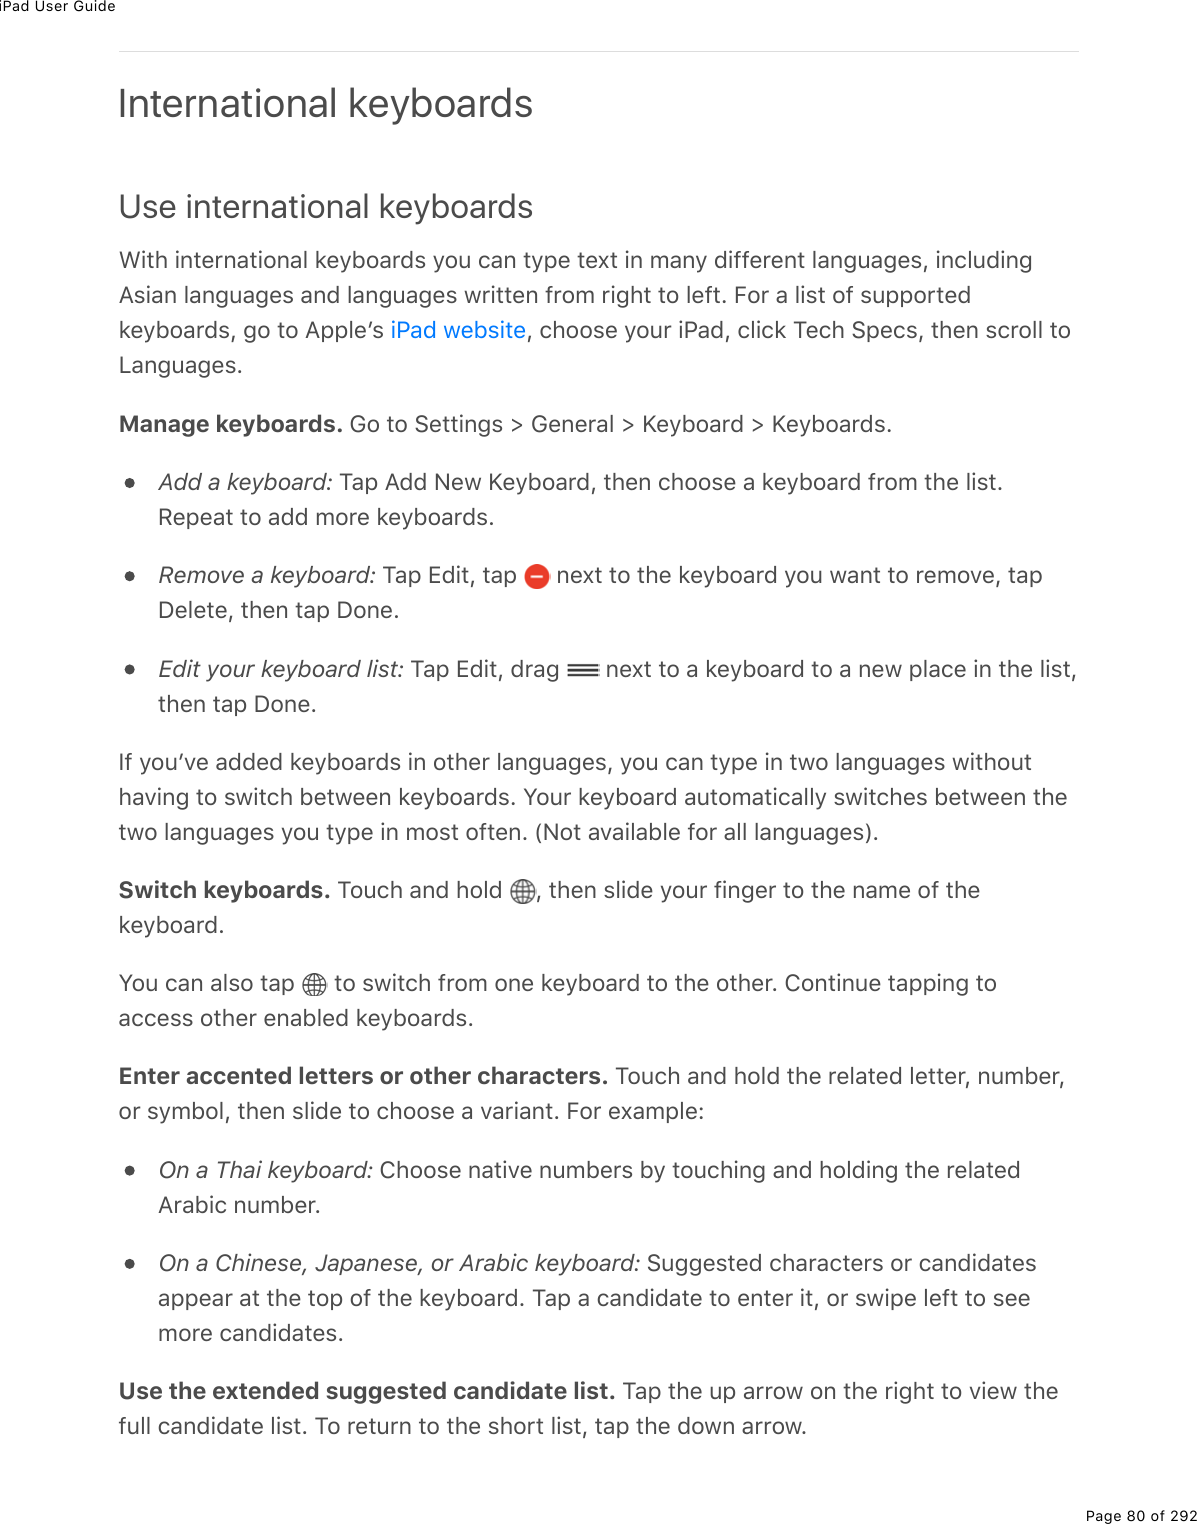 iPad User GuidePage 80 of 292International keyboardsUse international keyboardsWith international keyboards you can type text in many different languages, includingAsian languages and languages written from right to left. For a list of supportedkeyboards, go to Appleʼs  , choose your iPad, click Tech Specs, then scroll toLanguages.Manage keyboards. Go to Settings &gt; General &gt; Keyboard &gt; Keyboards.Add a keyboard: Tap Add New Keyboard, then choose a keyboard from the list.Repeat to add more keyboards.Remove a keyboard: Tap Edit, tap   next to the keyboard you want to remove, tapDelete, then tap Done.Edit your keyboard list: Tap Edit, drag   next to a keyboard to a new place in the list,then tap Done.If youʼve added keyboards in other languages, you can type in two languages withouthaving to switch between keyboards. Your keyboard automatically switches between thetwo languages you type in most often. (Not available for all languages).Switch keyboards. Touch and hold  , then slide your finger to the name of thekeyboard.You can also tap   to switch from one keyboard to the other. Continue tapping toaccess other enabled keyboards.Enter accented letters or other characters. Touch and hold the related letter, number,or symbol, then slide to choose a variant. For example:On a Thai keyboard: Choose native numbers by touching and holding the relatedArabic number.On a Chinese, Japanese, or Arabic keyboard: Suggested characters or candidatesappear at the top of the keyboard. Tap a candidate to enter it, or swipe left to seemore candidates.Use the extended suggested candidate list. Tap the up arrow on the right to view thefull candidate list. To return to the short list, tap the down arrow.iPad website